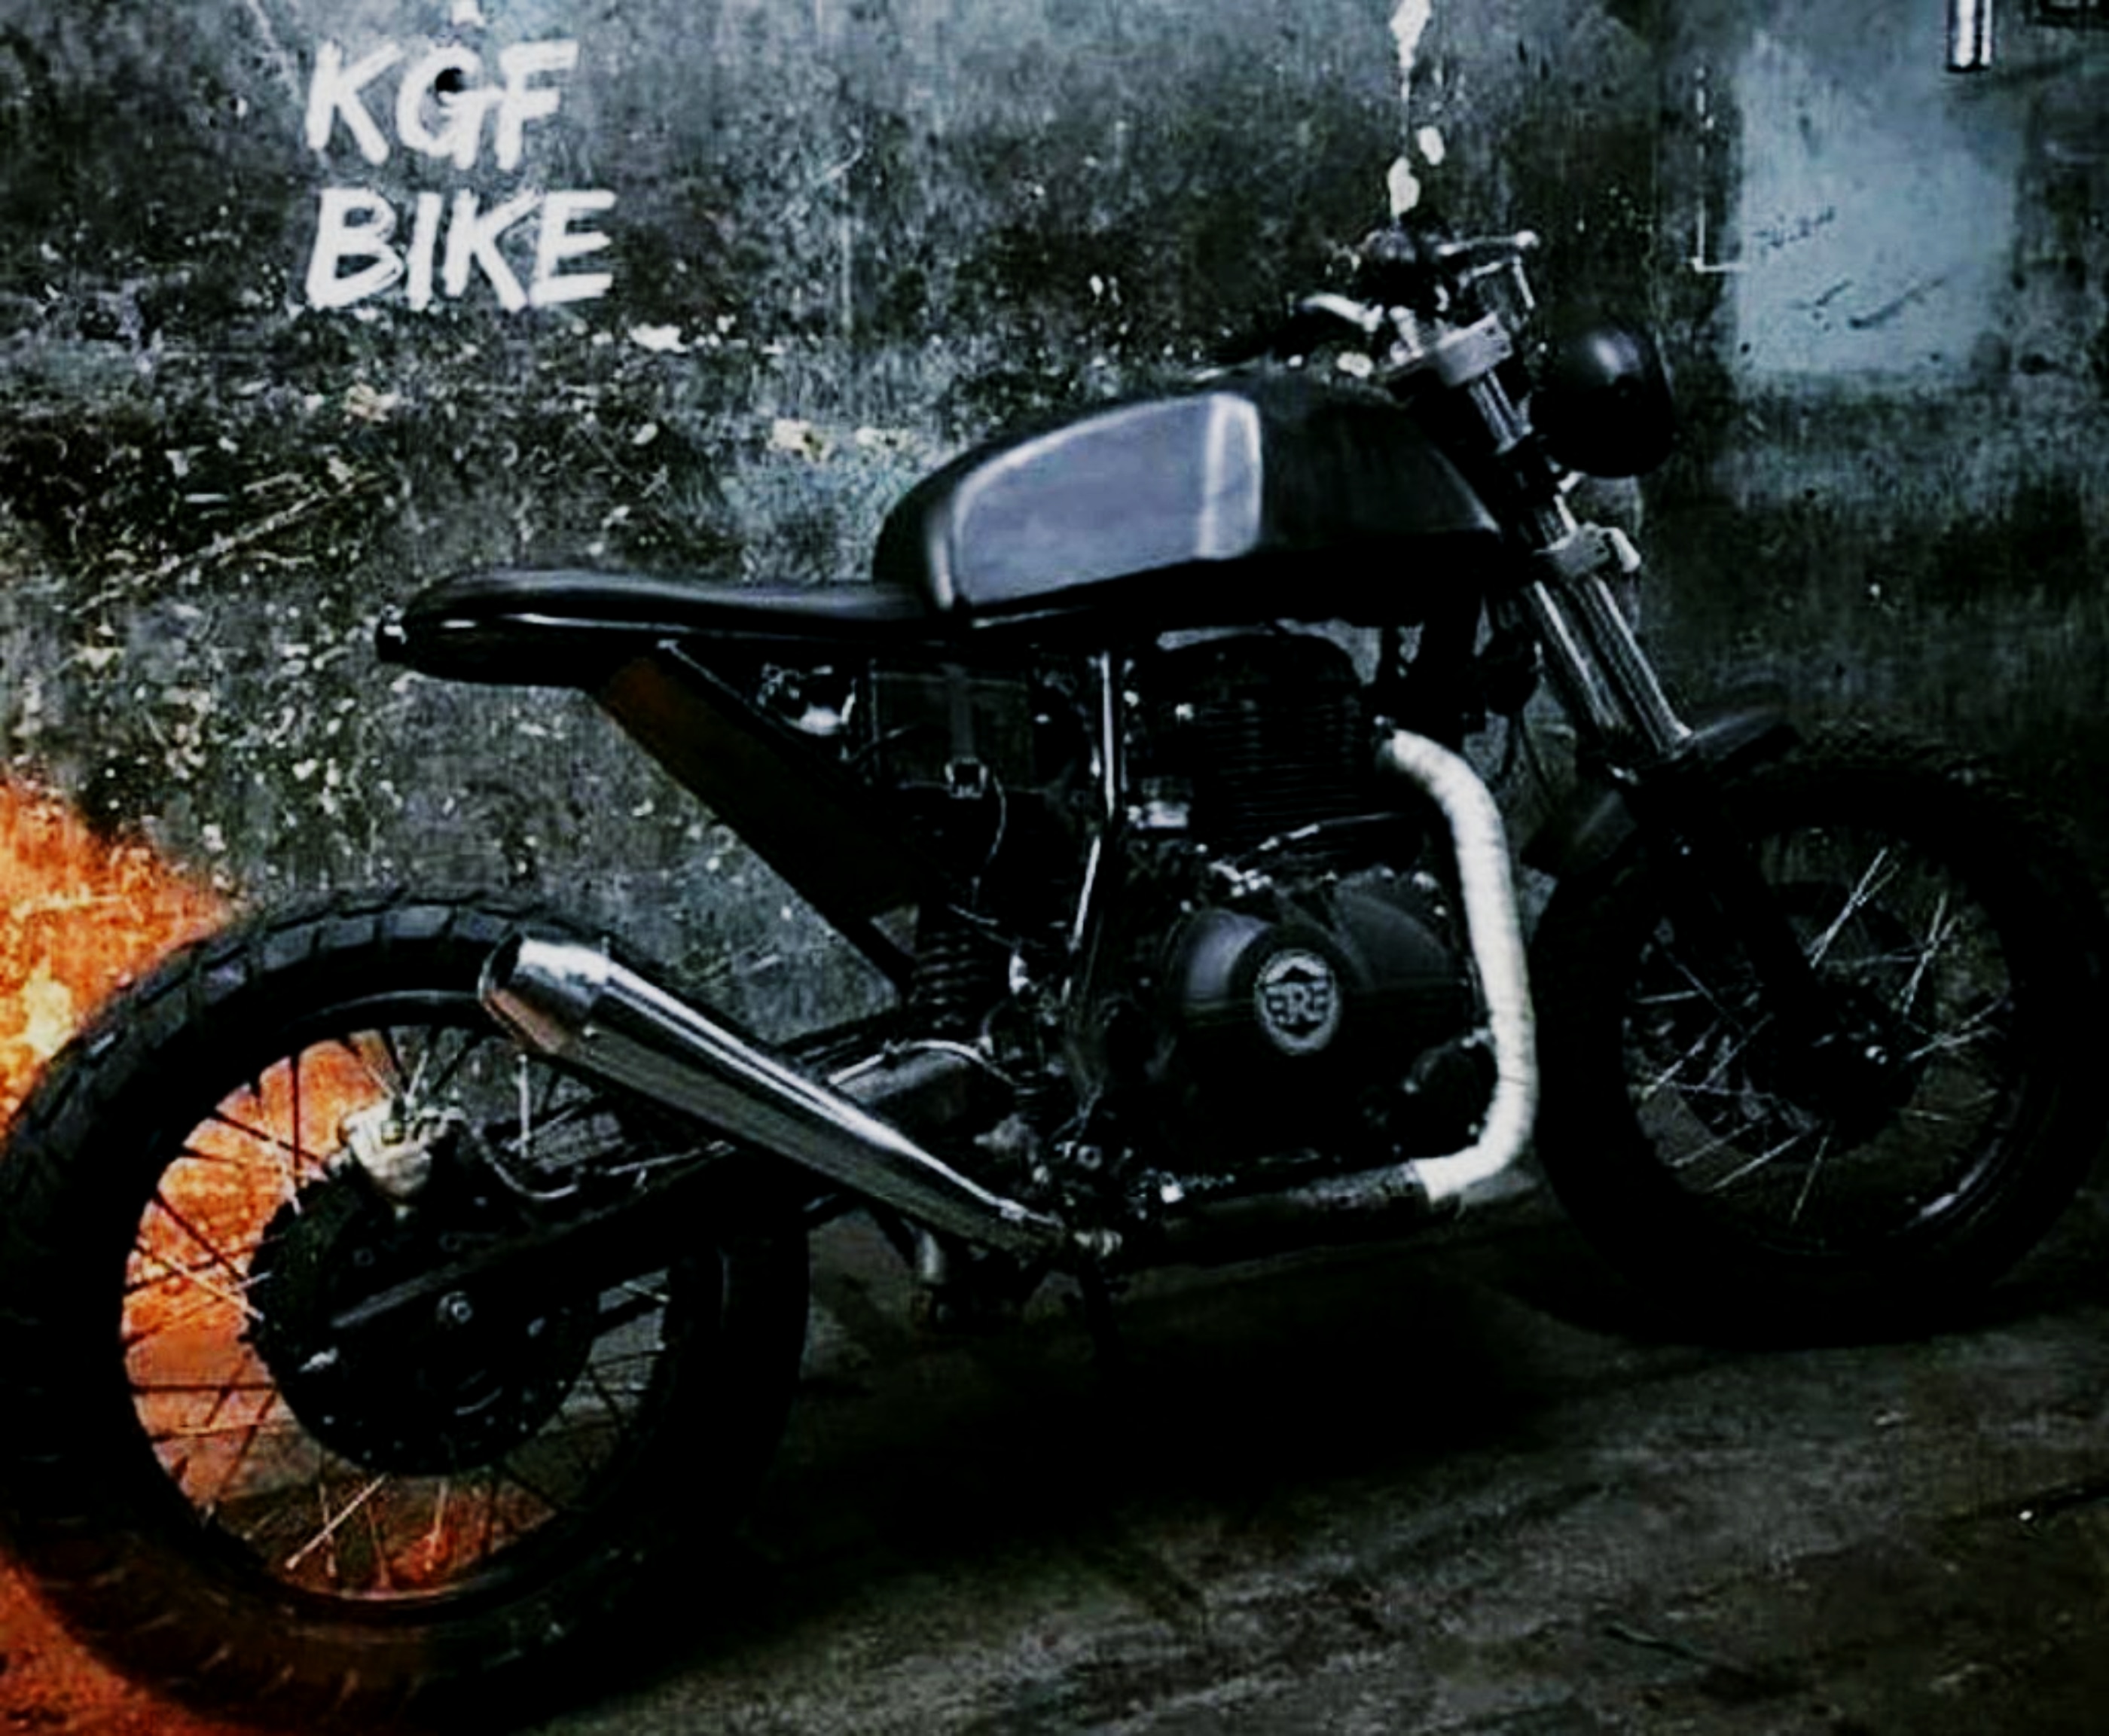 You are currently viewing KGF bike image editing background download free